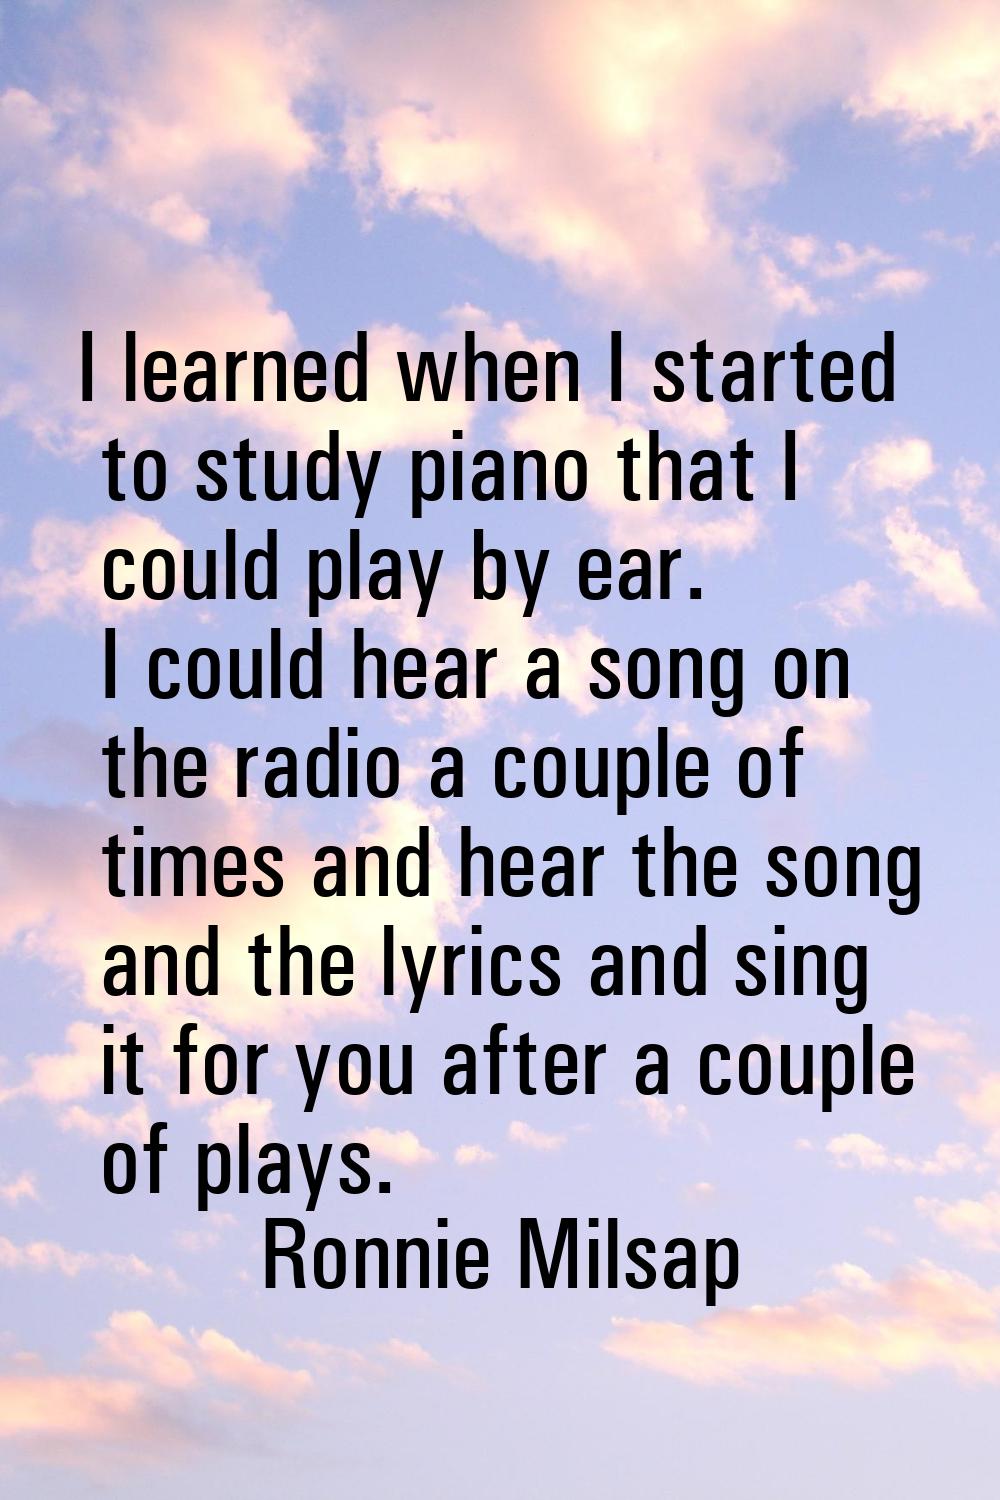 I learned when I started to study piano that I could play by ear. I could hear a song on the radio 